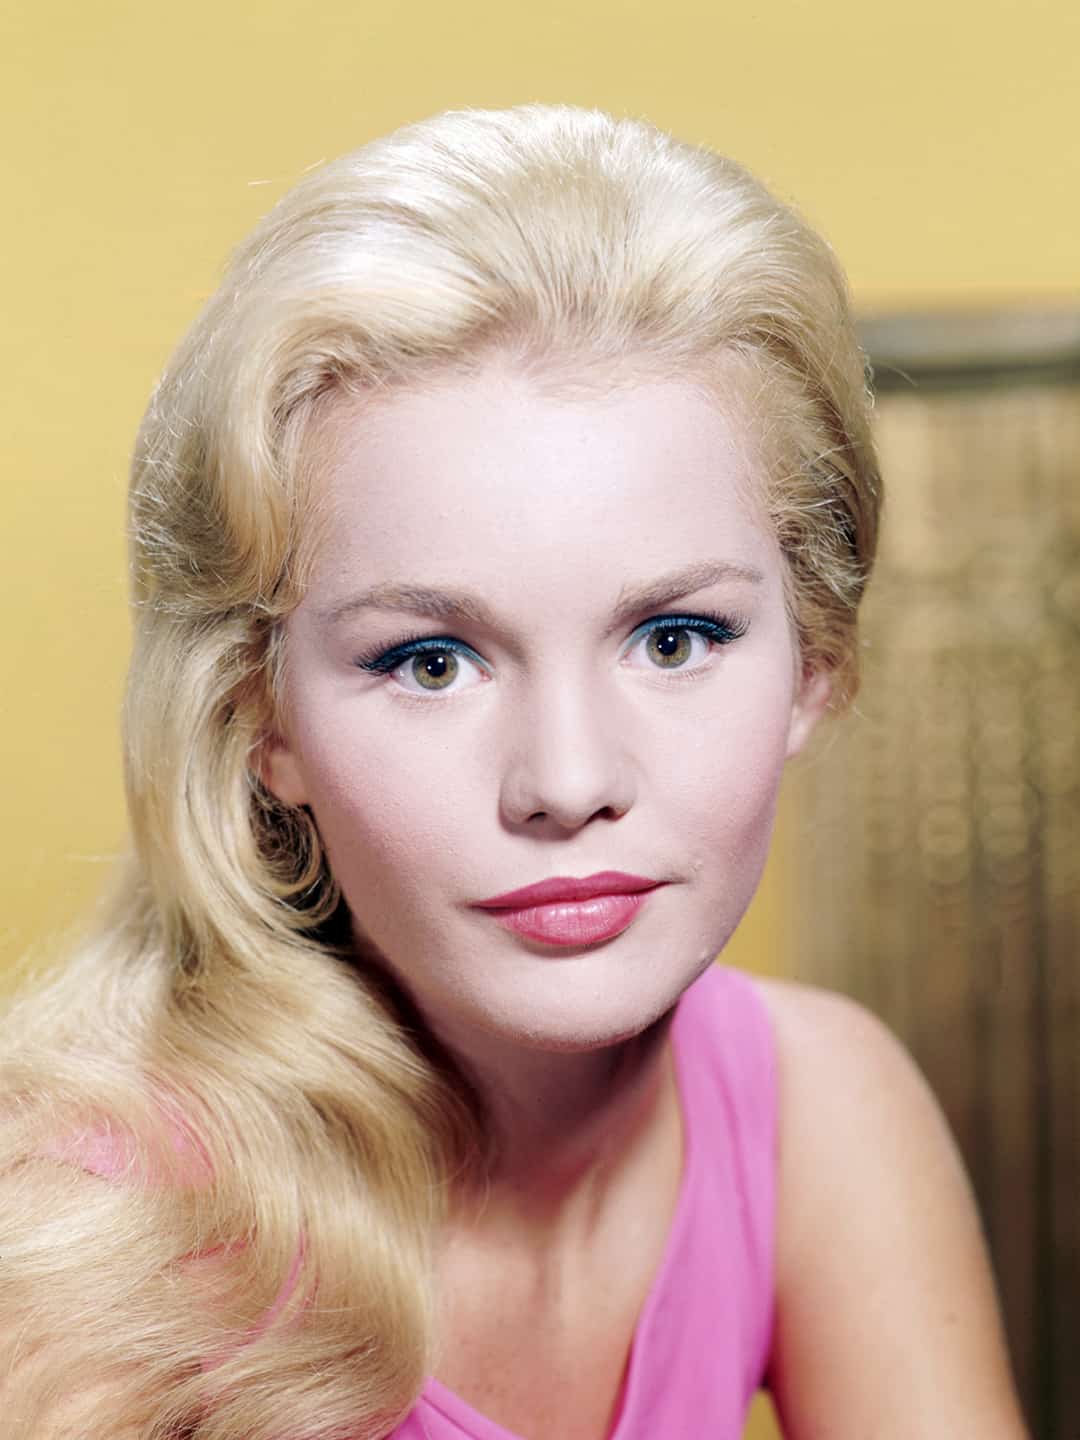 Tuesday Weld - Free pics, galleries & more at Babepedia